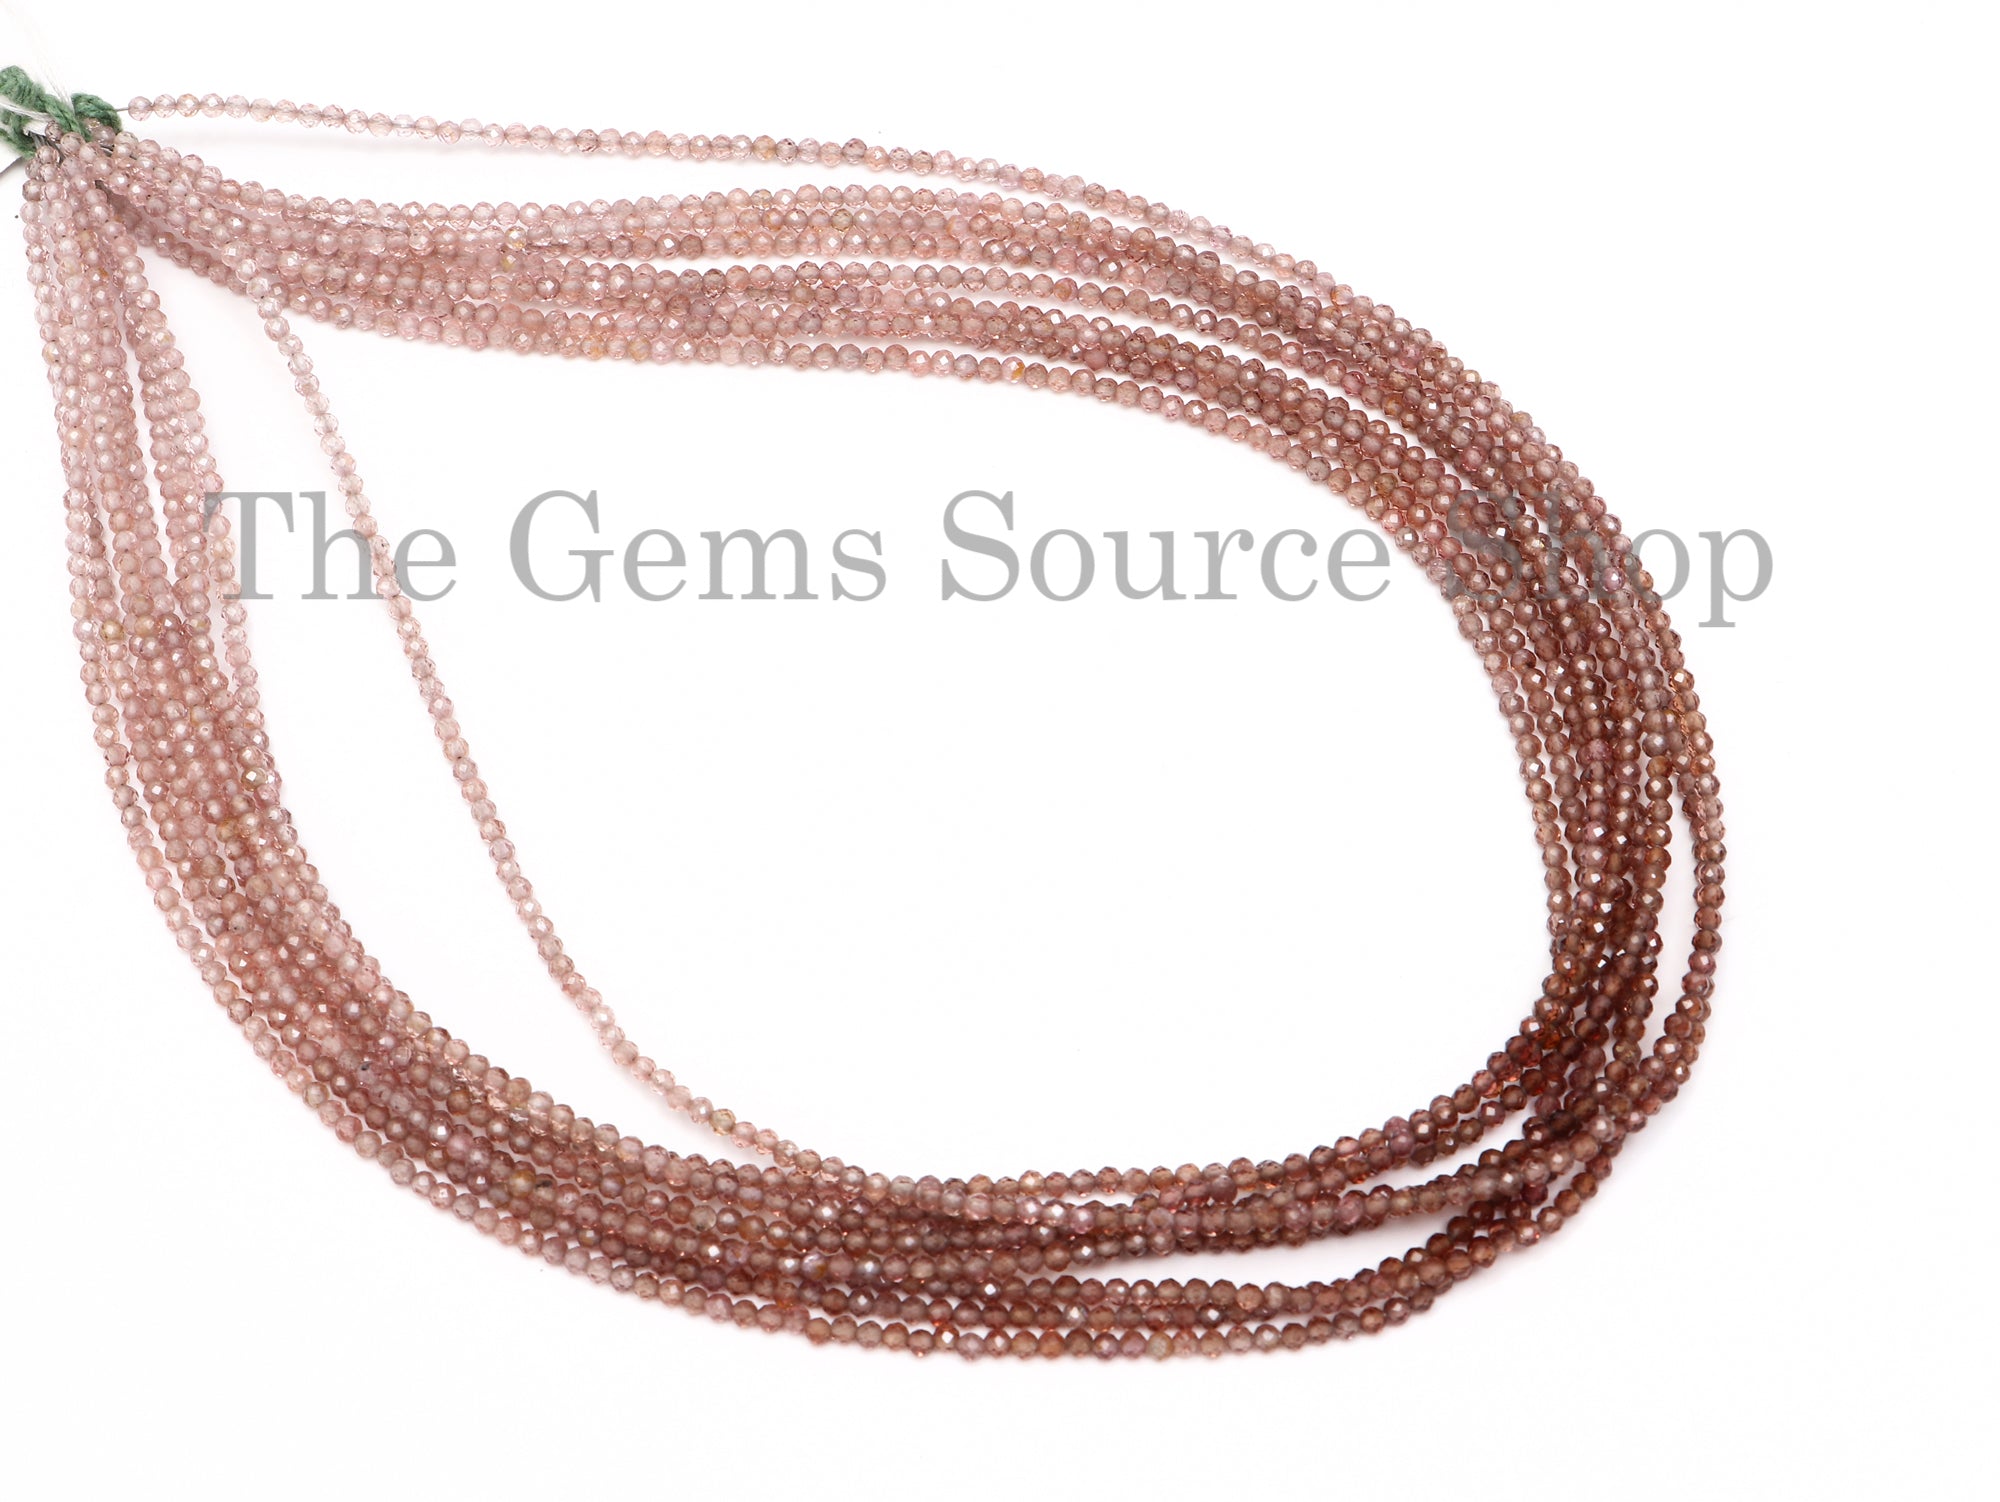 Shaded Light Brown Spinel Beads, Brown Spinel Faceted Beads, Brown Spinel Rondelle Beads, Brown Spinel Gemstone Beads